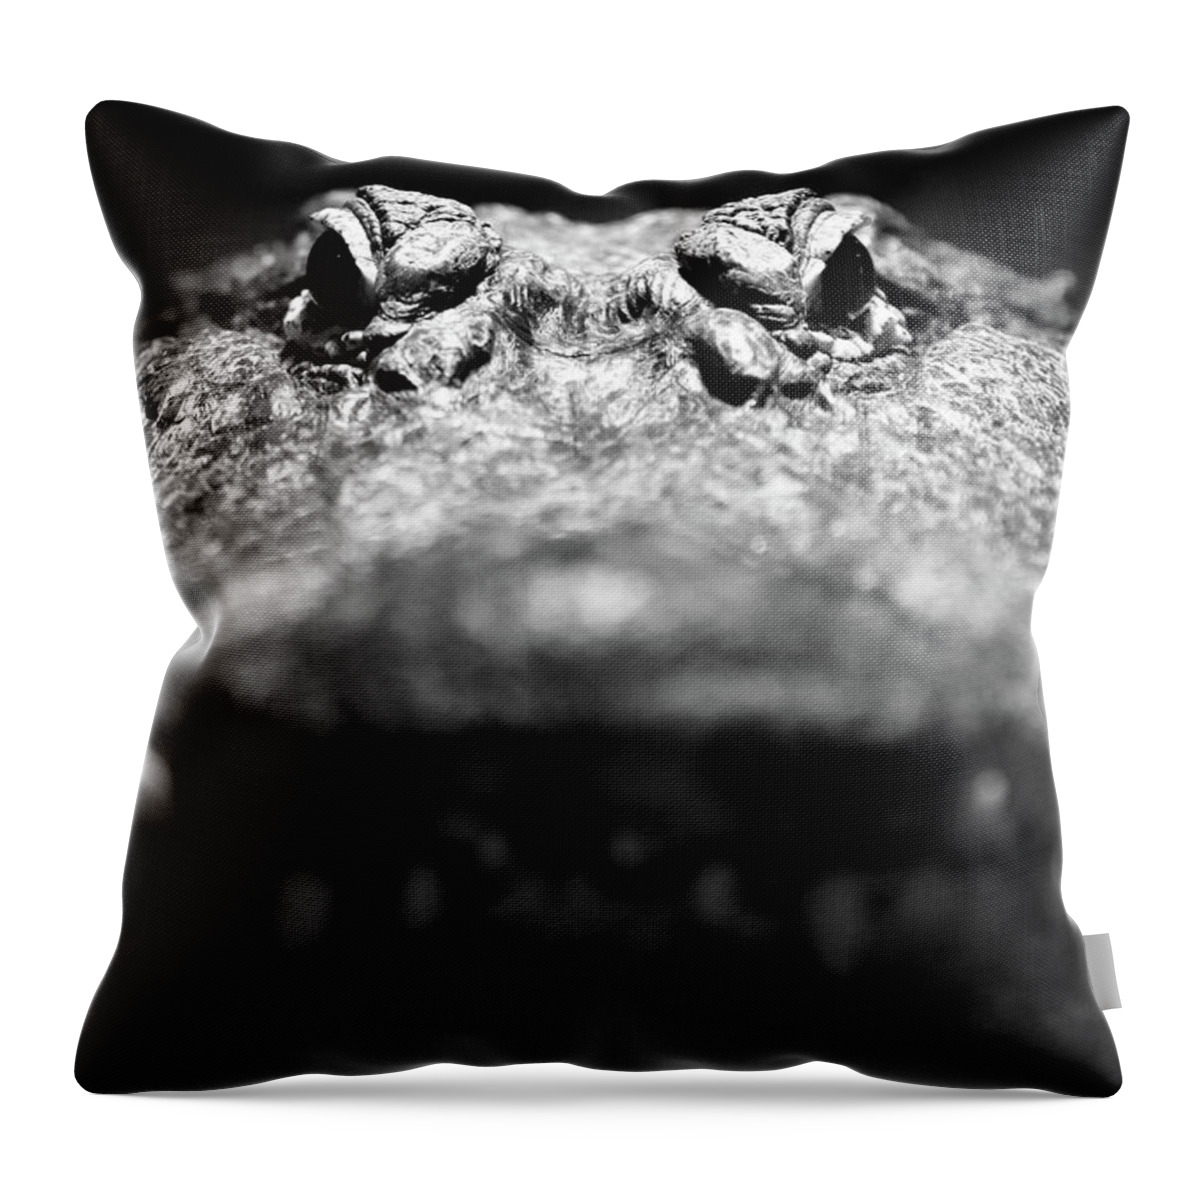 Reptile Throw Pillow featuring the photograph Come A Little Closer by Lens Art Photography By Larry Trager